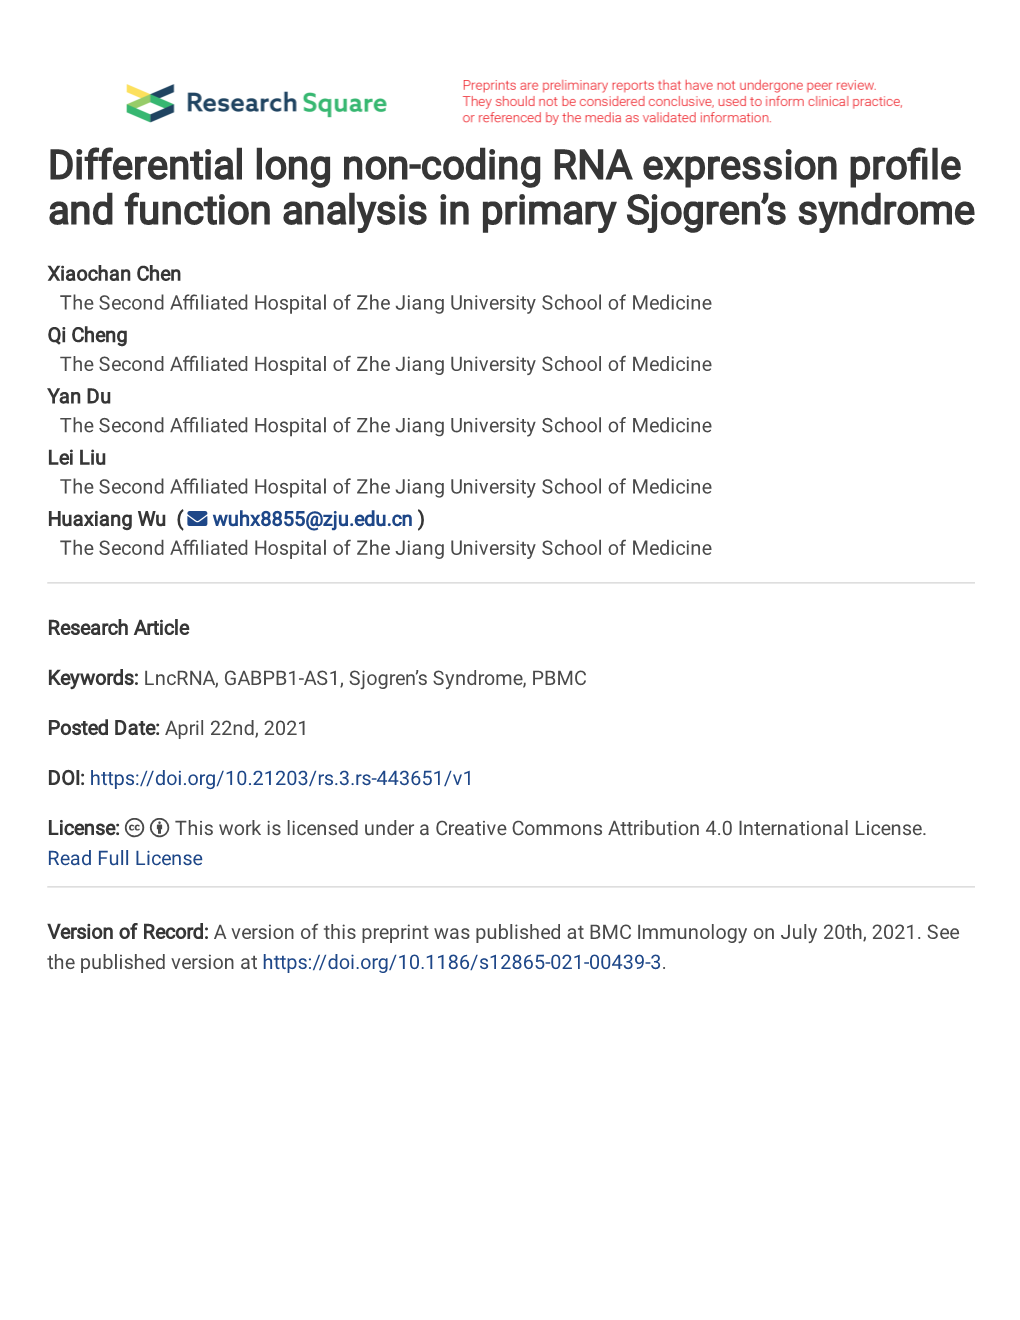 Differential Long Non-Coding RNA Expression Profile and Function Analysis in Primary Sjogren’S Syndrome